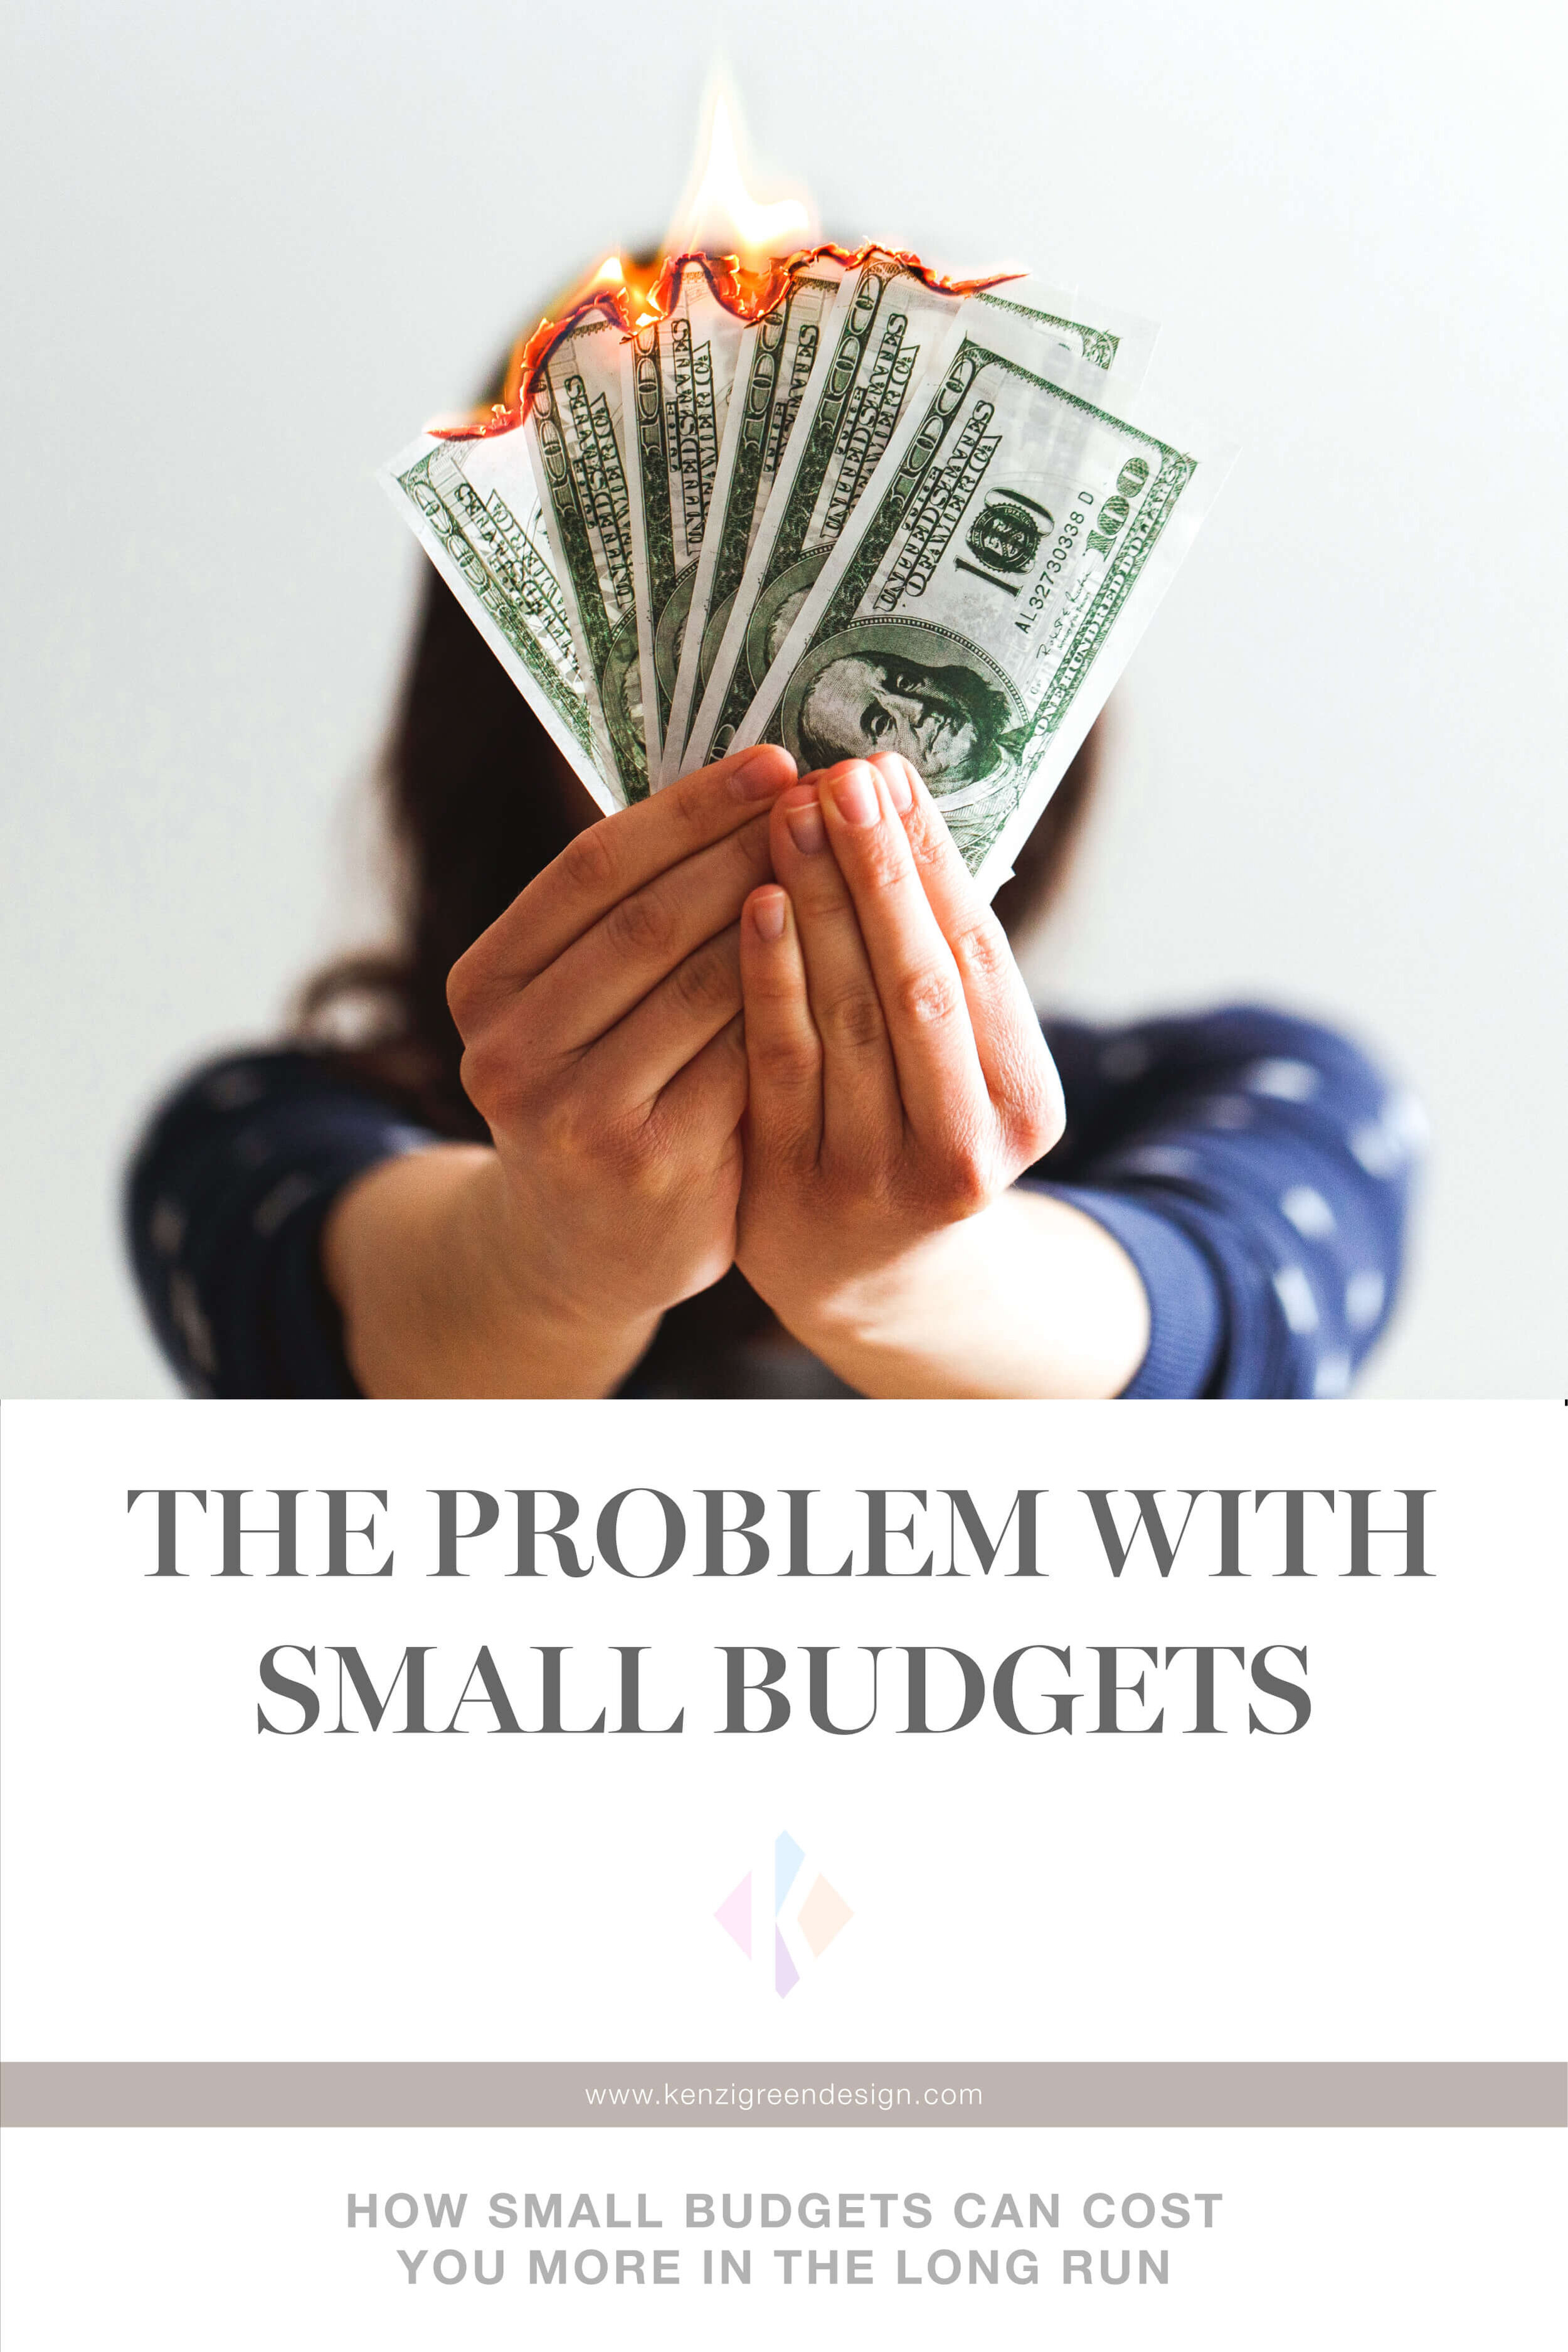 The Problem With Small Budgets #businesstips #budgeting #budgettips